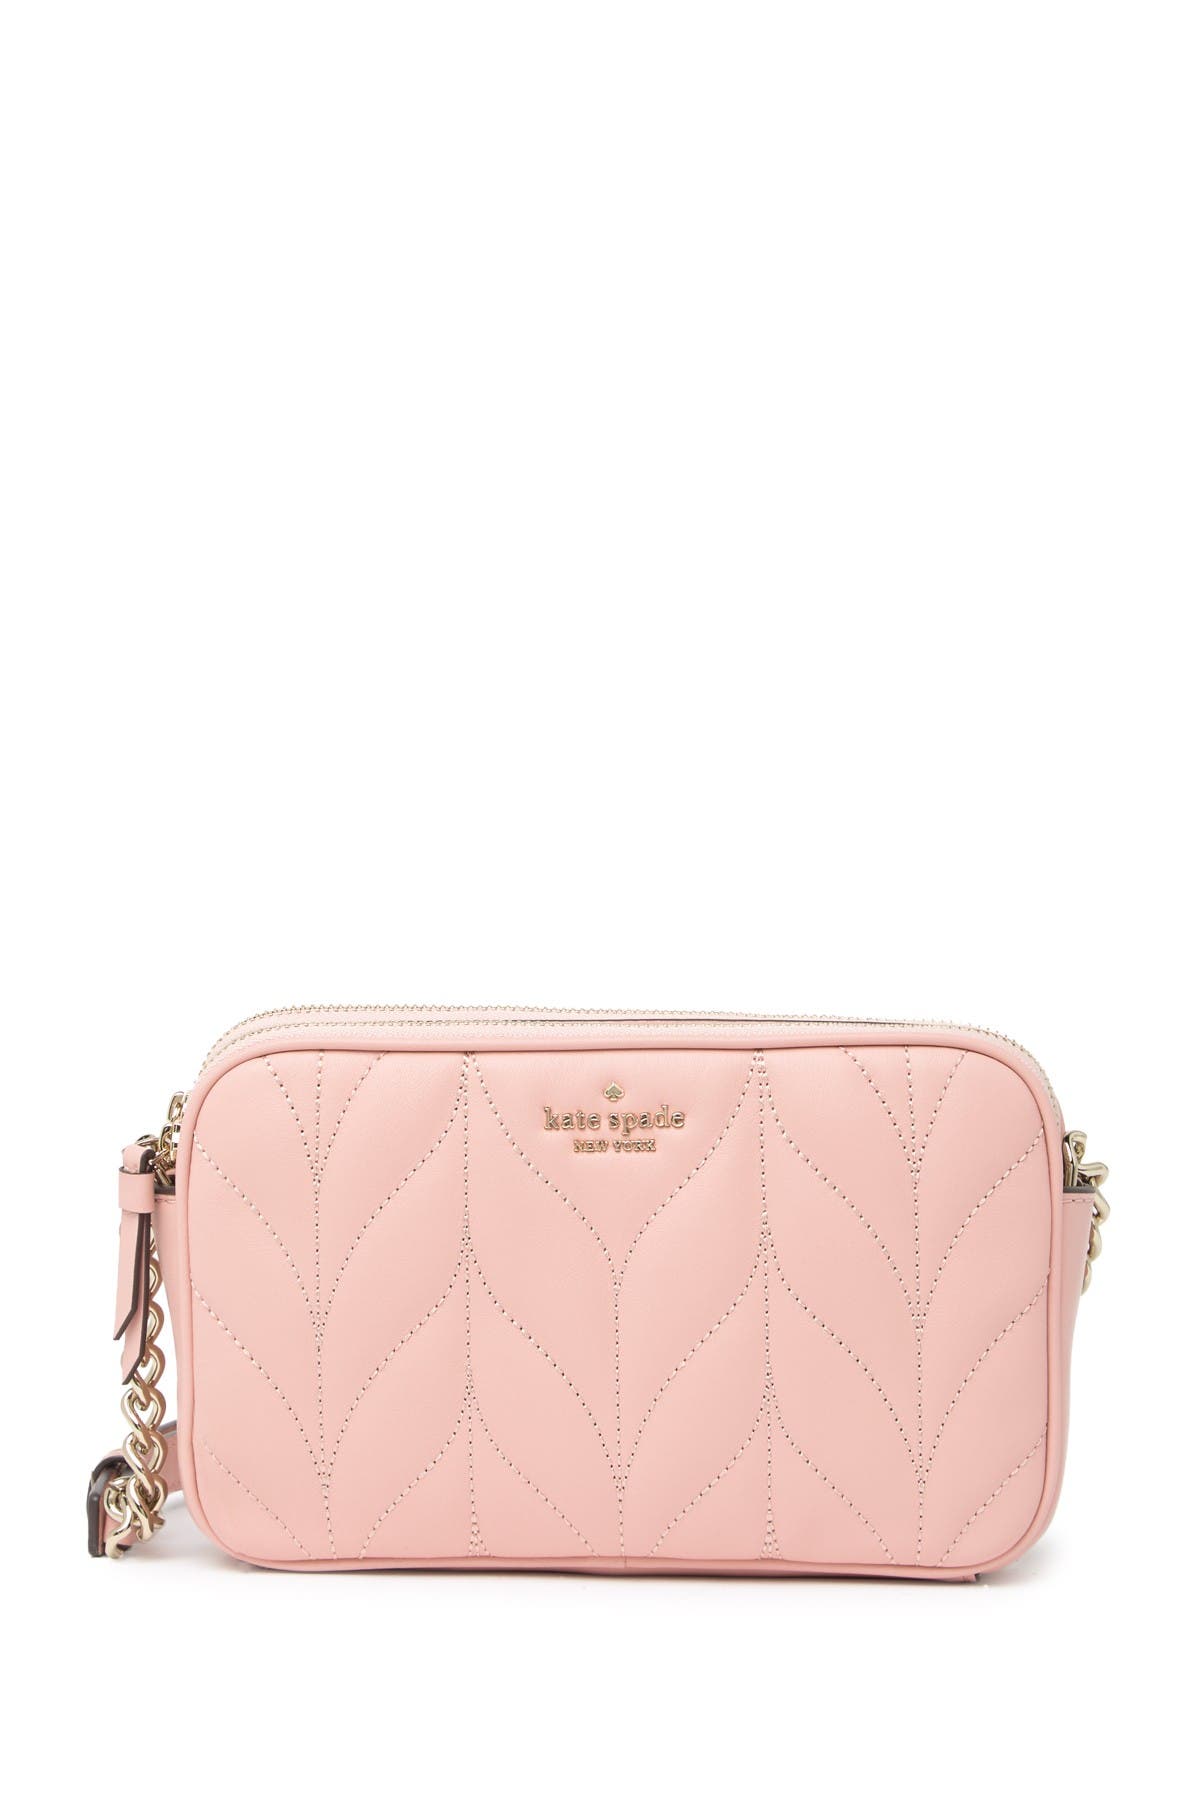 kate spade quilted crossbody